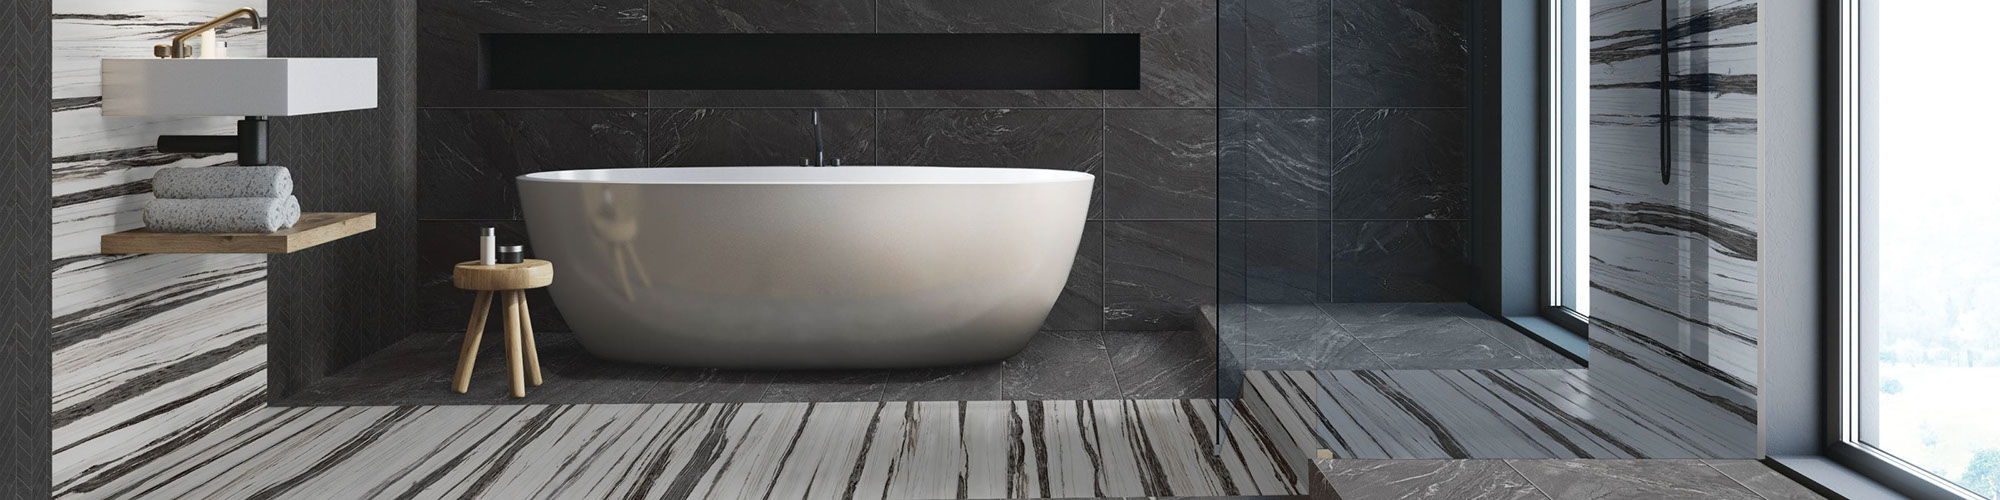 Modern décor wet room with white soaker tub, shower wall, floor, and niche of black marble look tile with white & black tile accents, floating vanity countertop & shelf.